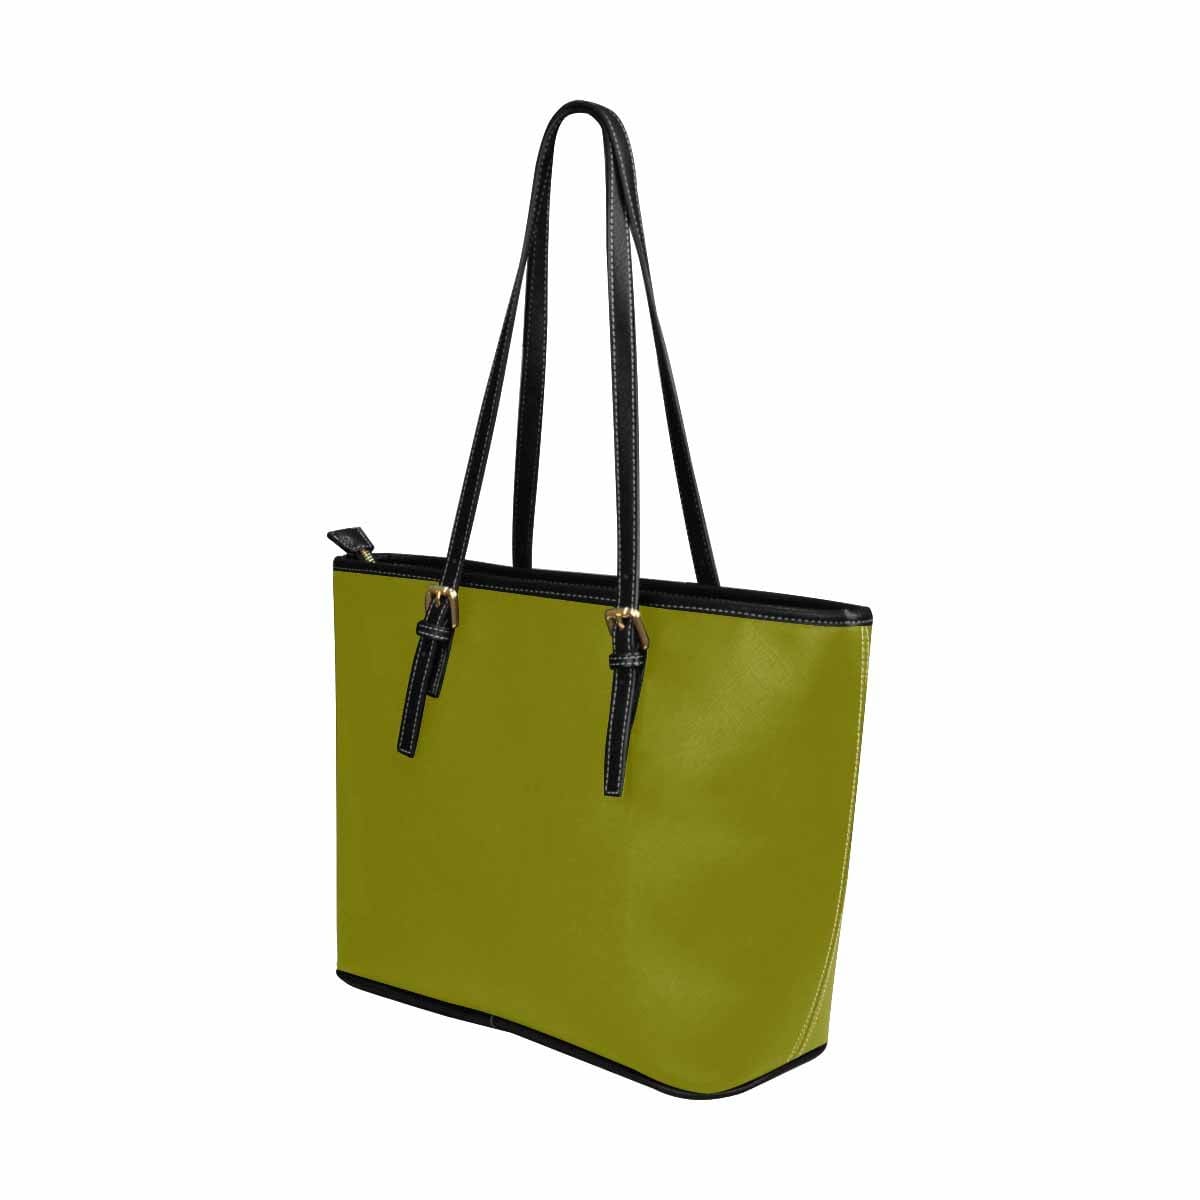 Large Leather Tote Shoulder Bag - Dark Olive Green - Bags | Leather Tote Bags